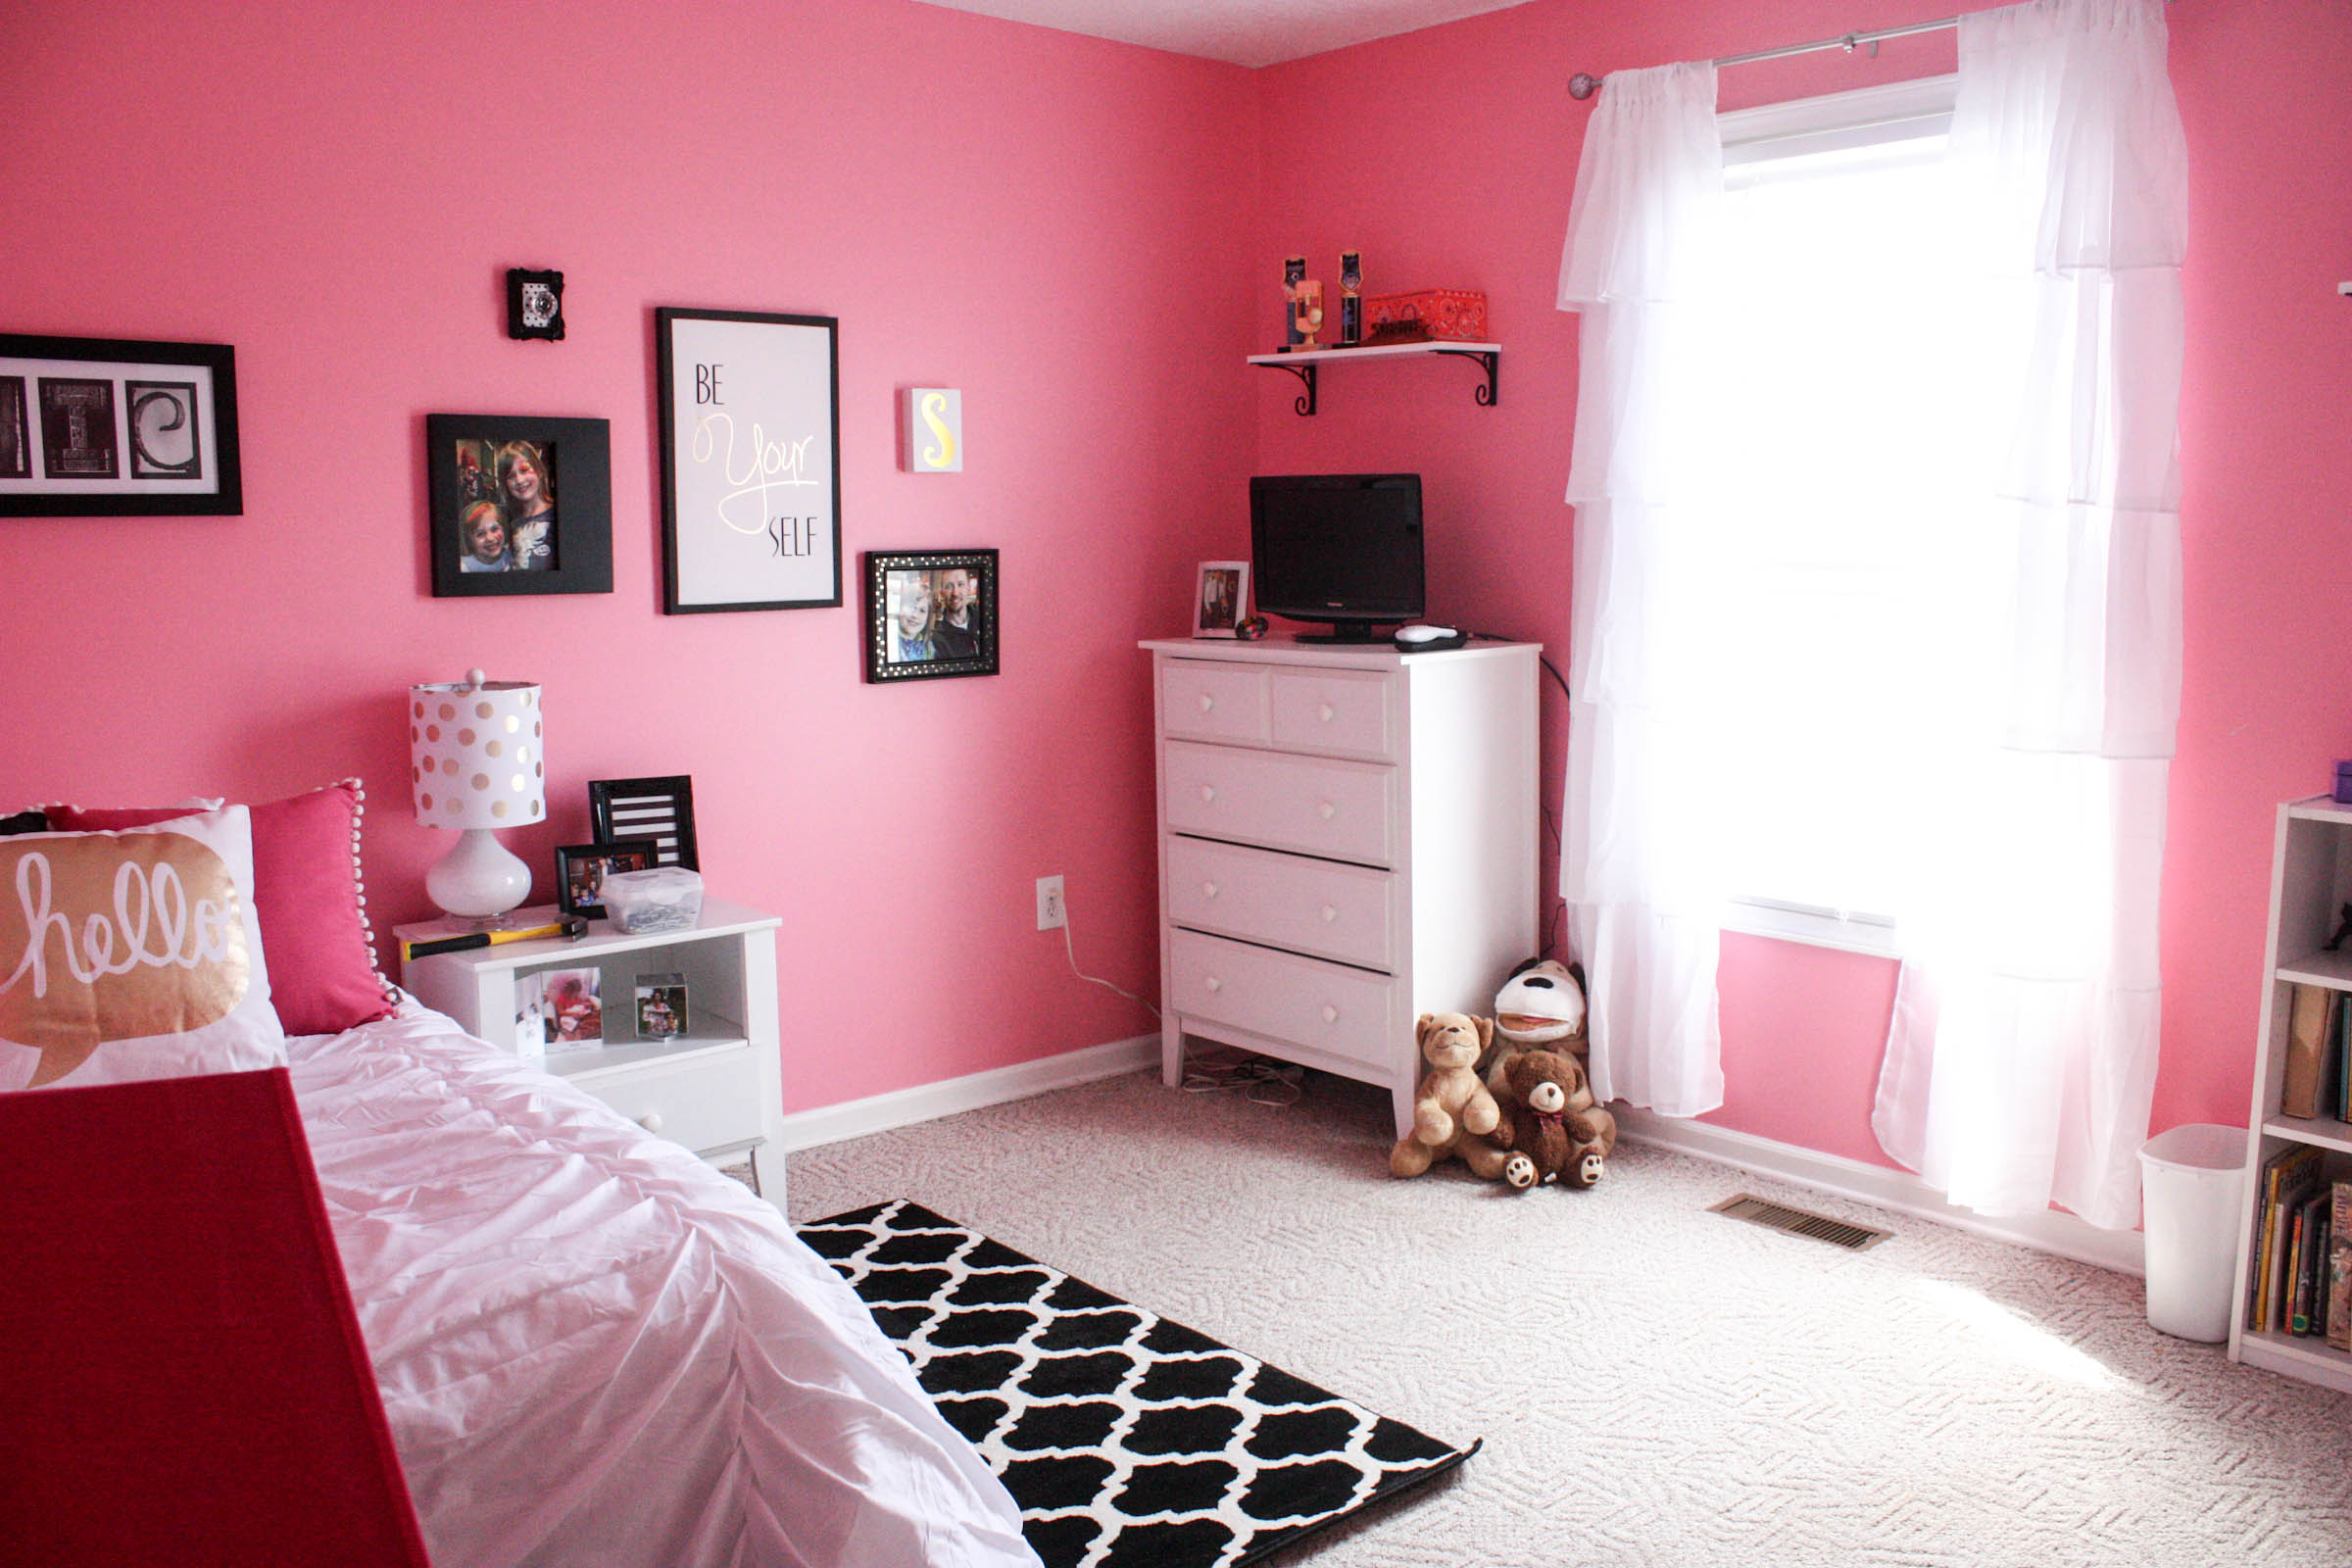 Creating a More Mature Space for a Tween Girl